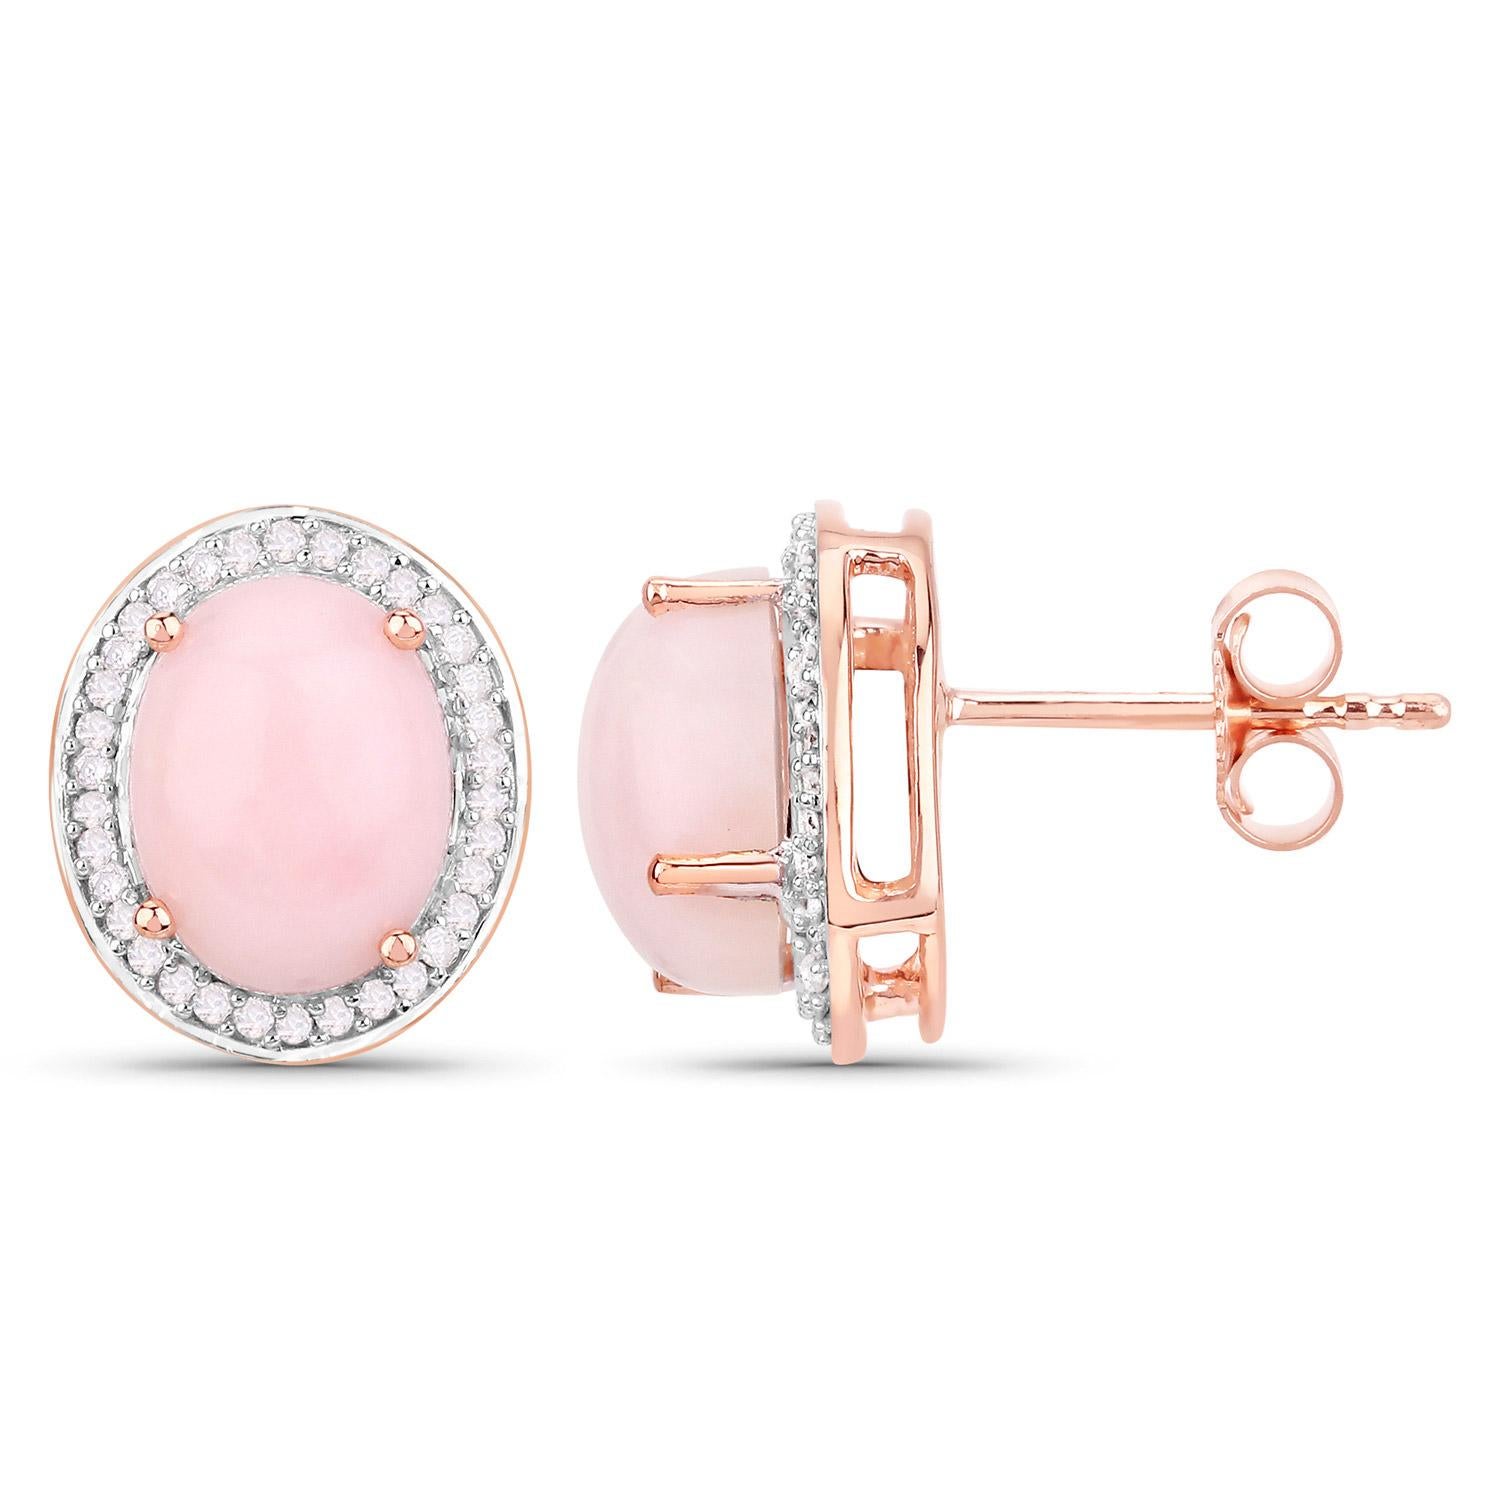 Contemporary Natural Pink Opal and Diamond Earrings Total 4.25 Carats 14k Rose Gold For Sale